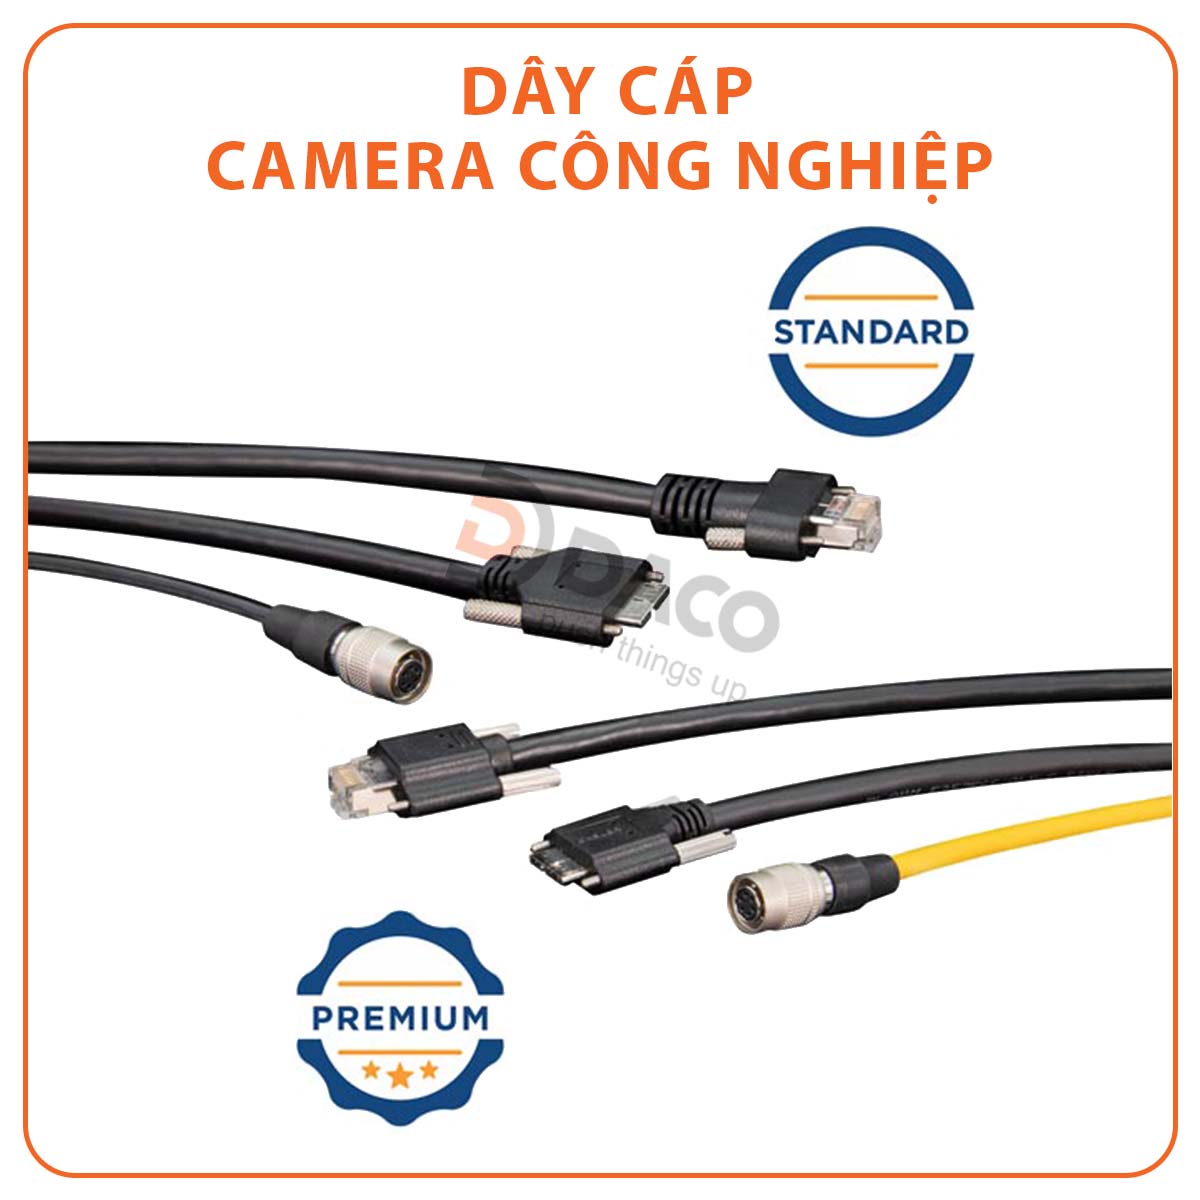 day cap (cable) camera cong nghiep basler